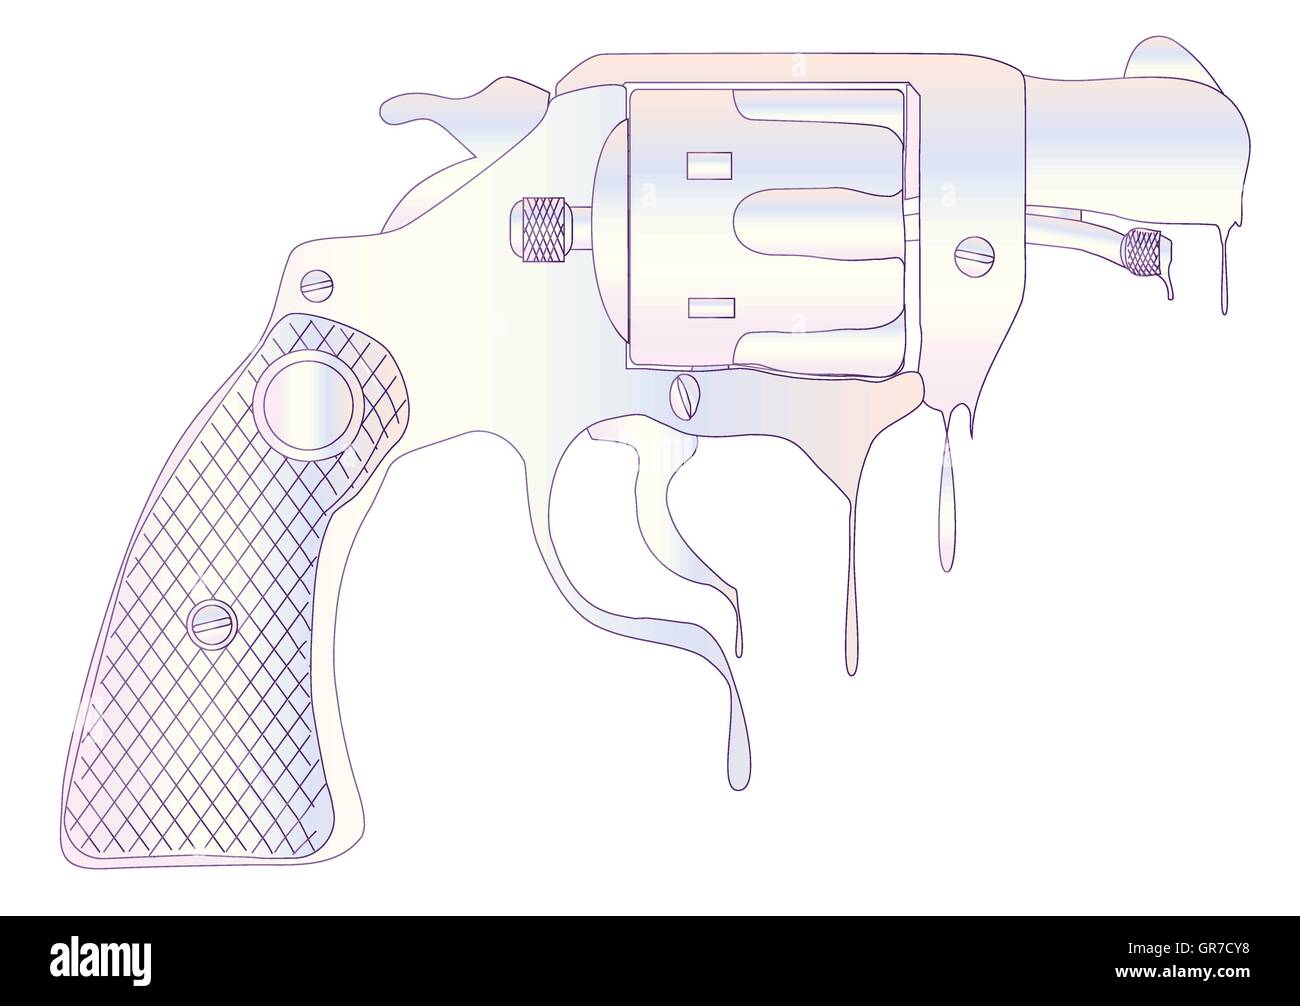 A snub nose revolver made from melting ice Stock Vector